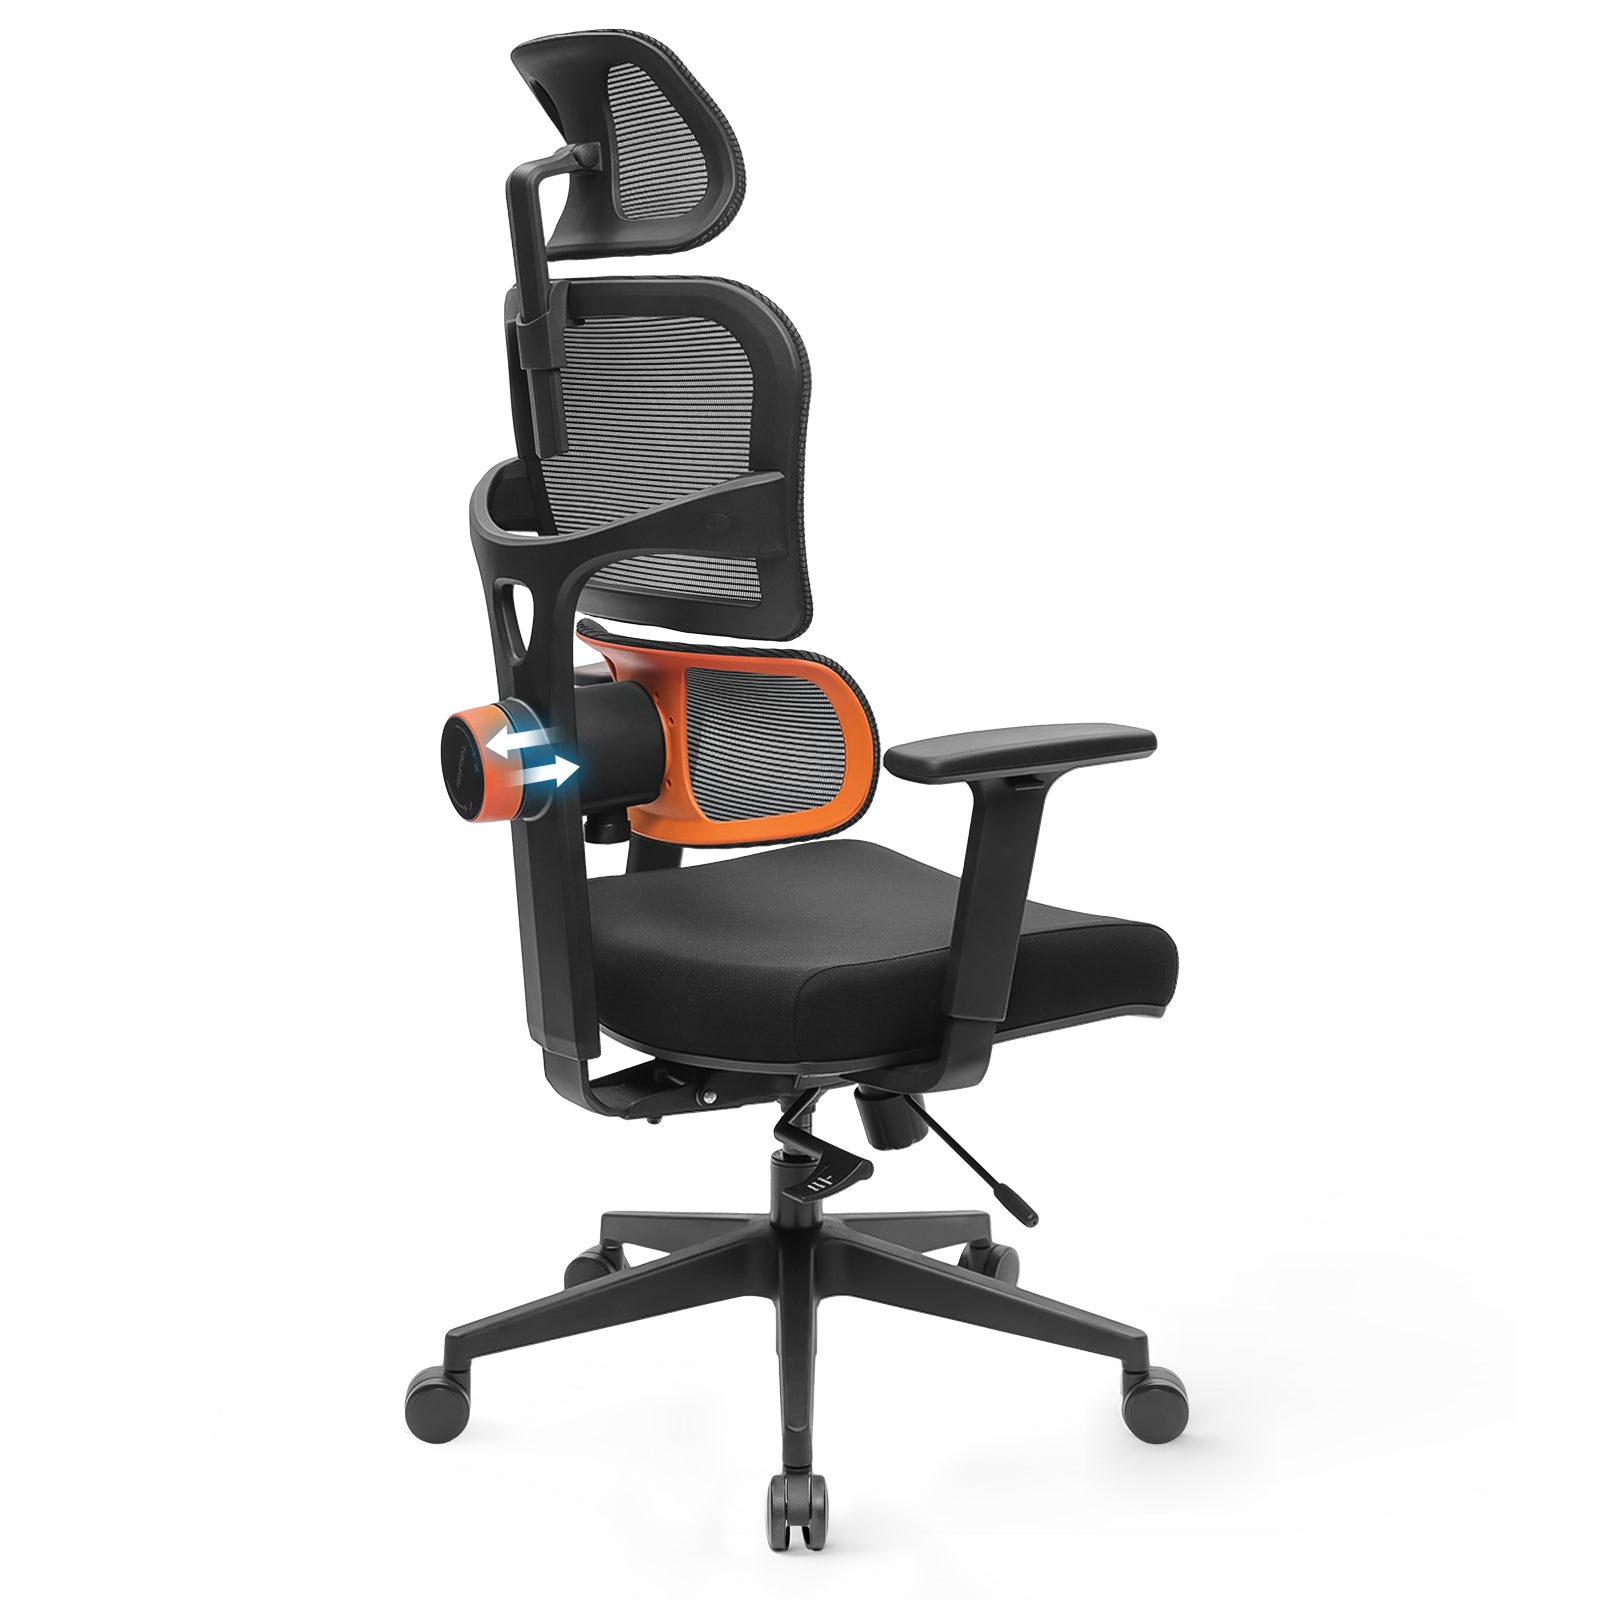 （Standard version）Ergonomic office chair with footrest, High back desk chair with unique adjustable lumbar support, office chair with 4D armrest